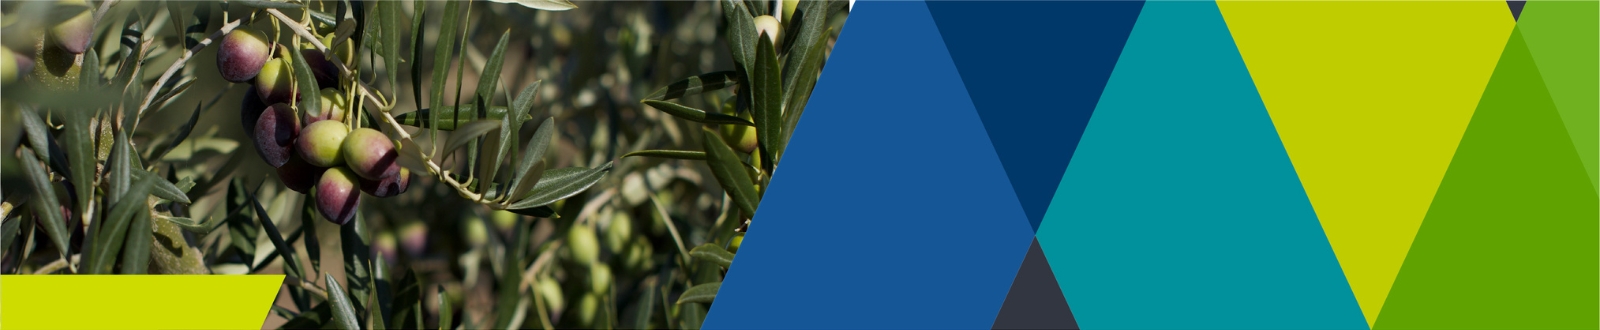 Banner image featuring olive trees